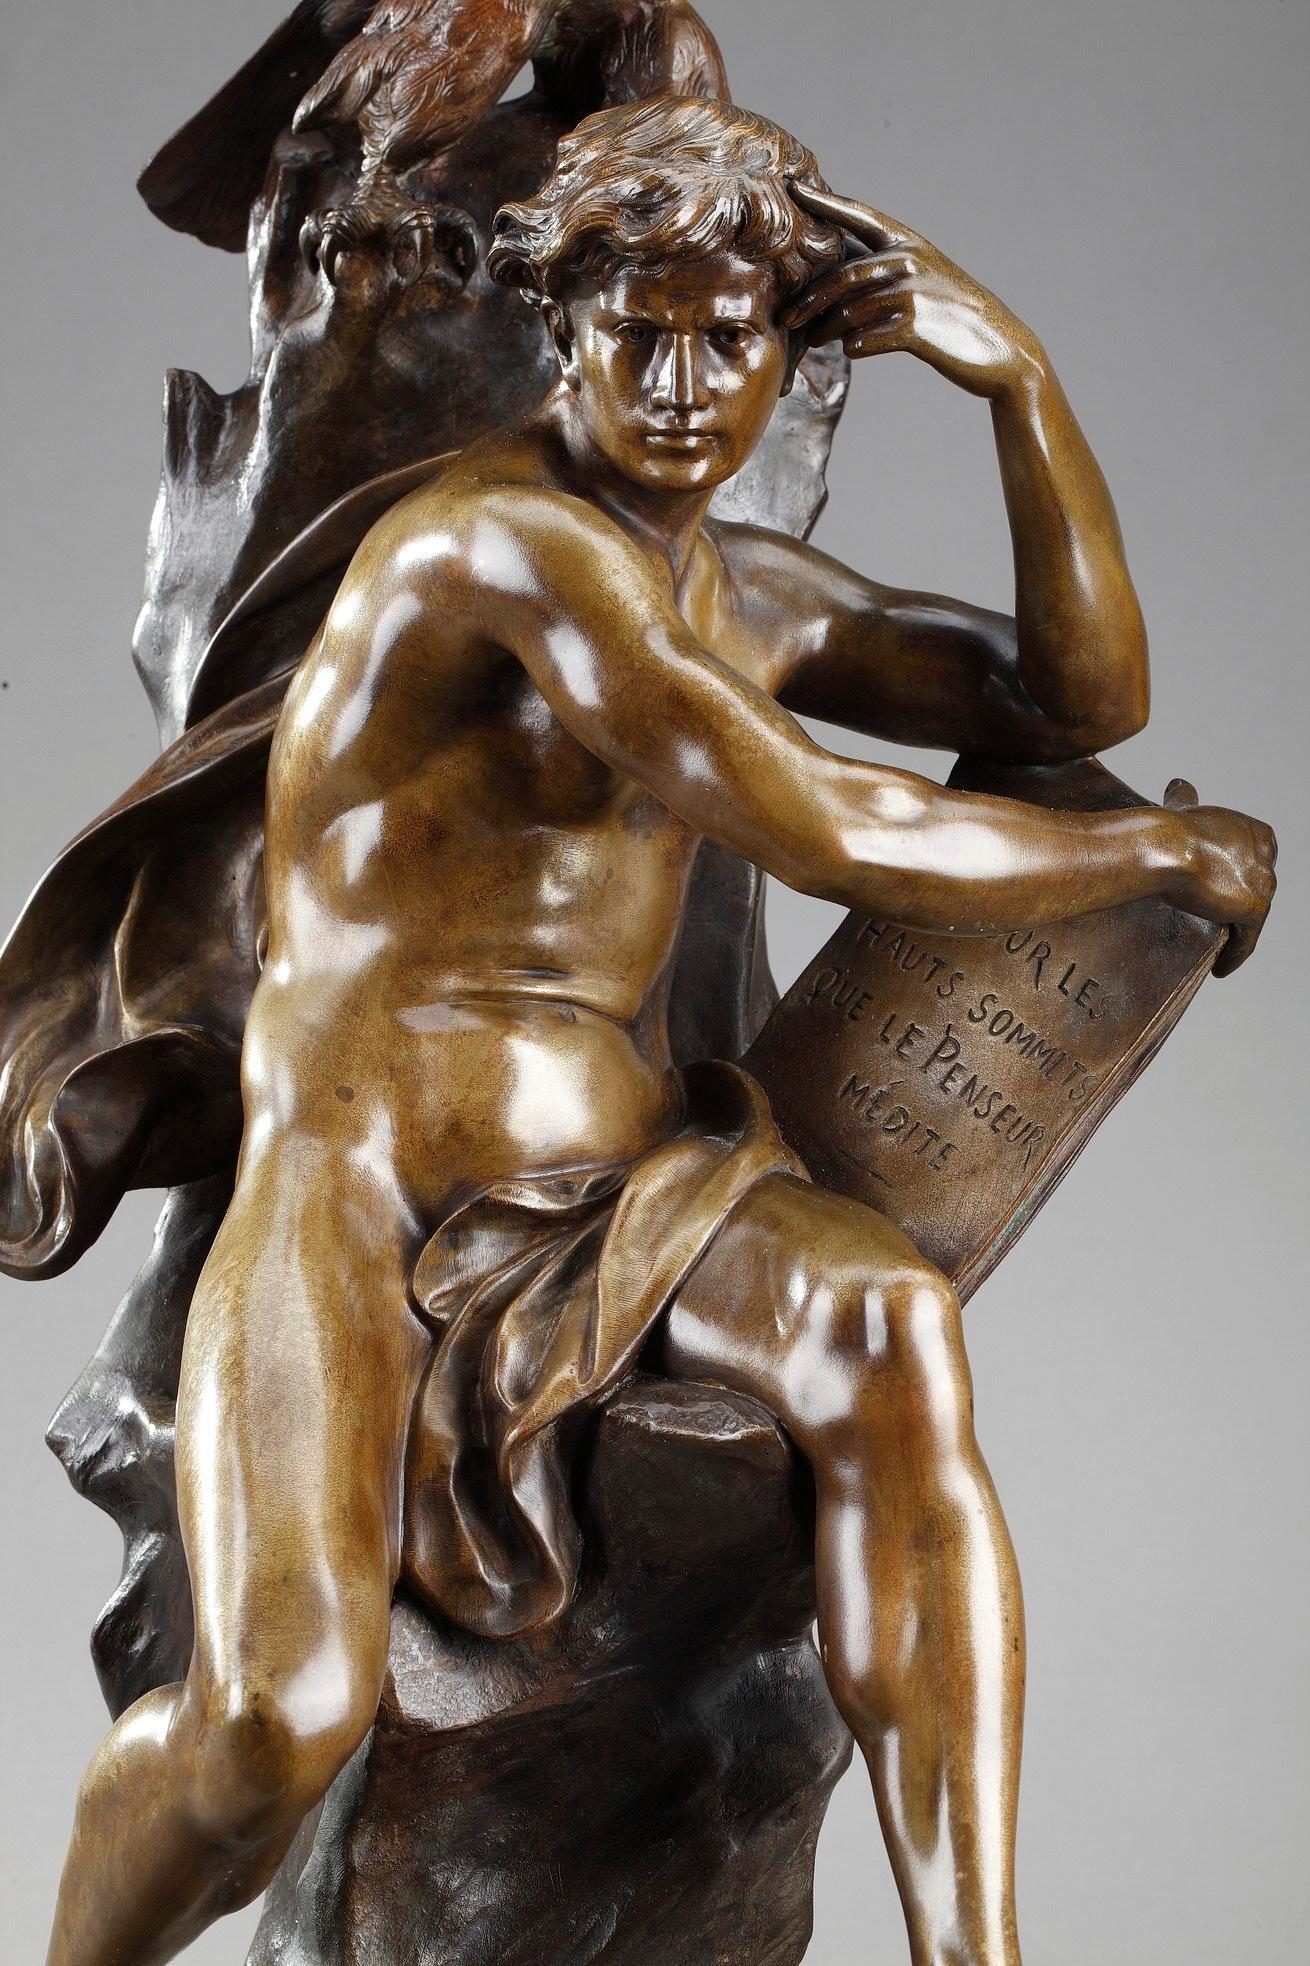 Allegorical bronze featuring Le Penseur (The Thinker) by Émile-Louis Picault (1833-1915). The young man sits on a rock in the company of an eagle, and holds a book marked: It is on the high peaks that the thinker meditates. Titled and signed on the